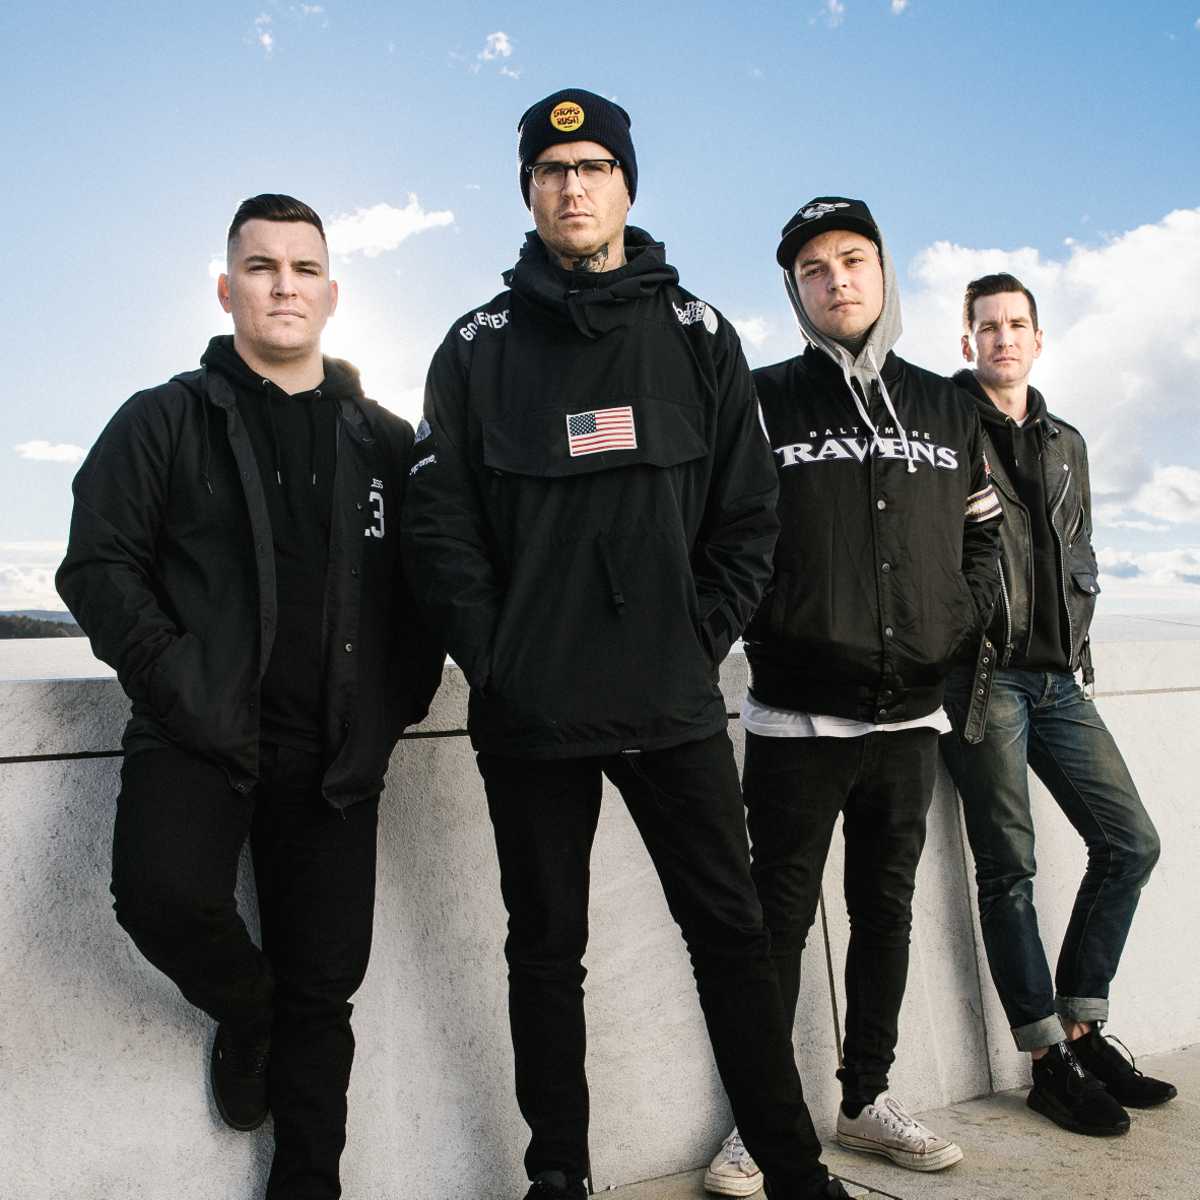 The Amity Affliction 